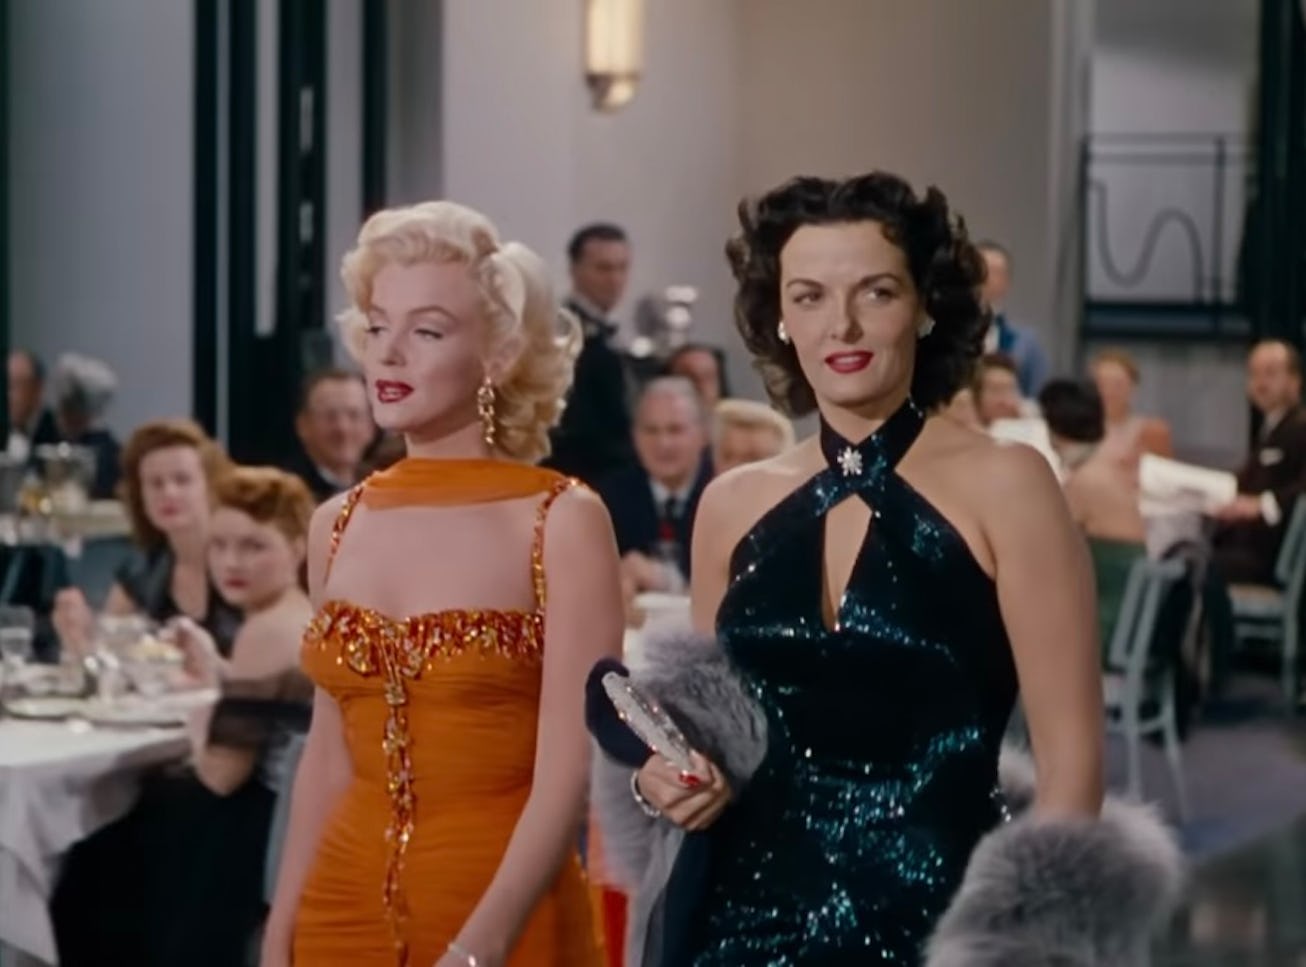 Marylin Monroe and Jane Russell in the scene from Gentlemen Prefer Blondes 